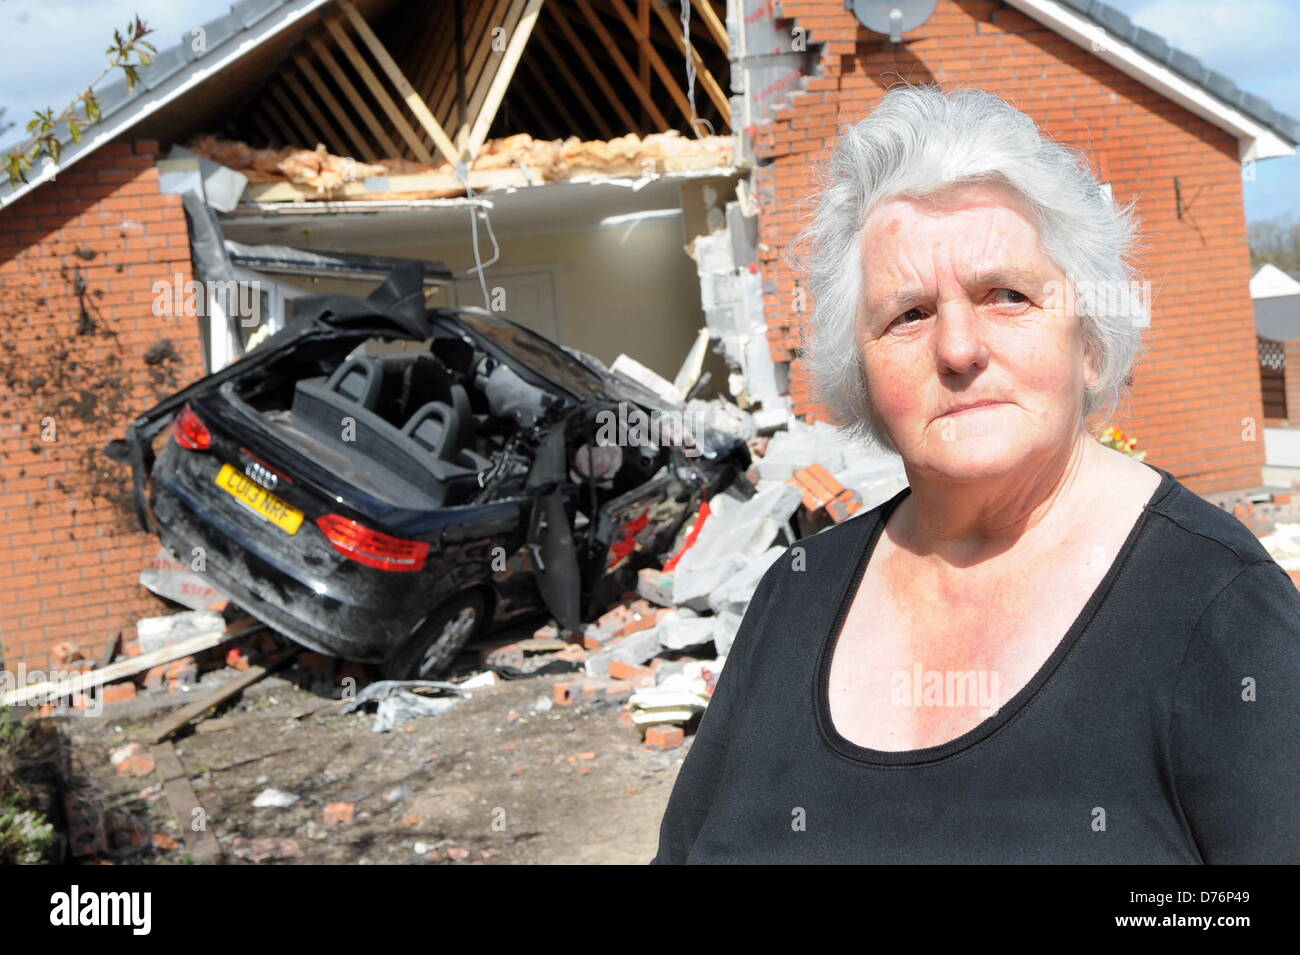 Gowerton, UK. 29th April 2013  Home owner Marianne Heath at the scene of an accident in which her bungalow, in Gowerton, near Swansea, UK, was partially destroyed when a brand new Audi convertible car plunged into the lounge whilst she was having breakfast in the kitchen. Credit:  D Legakis / Alamy Live News Stock Photo